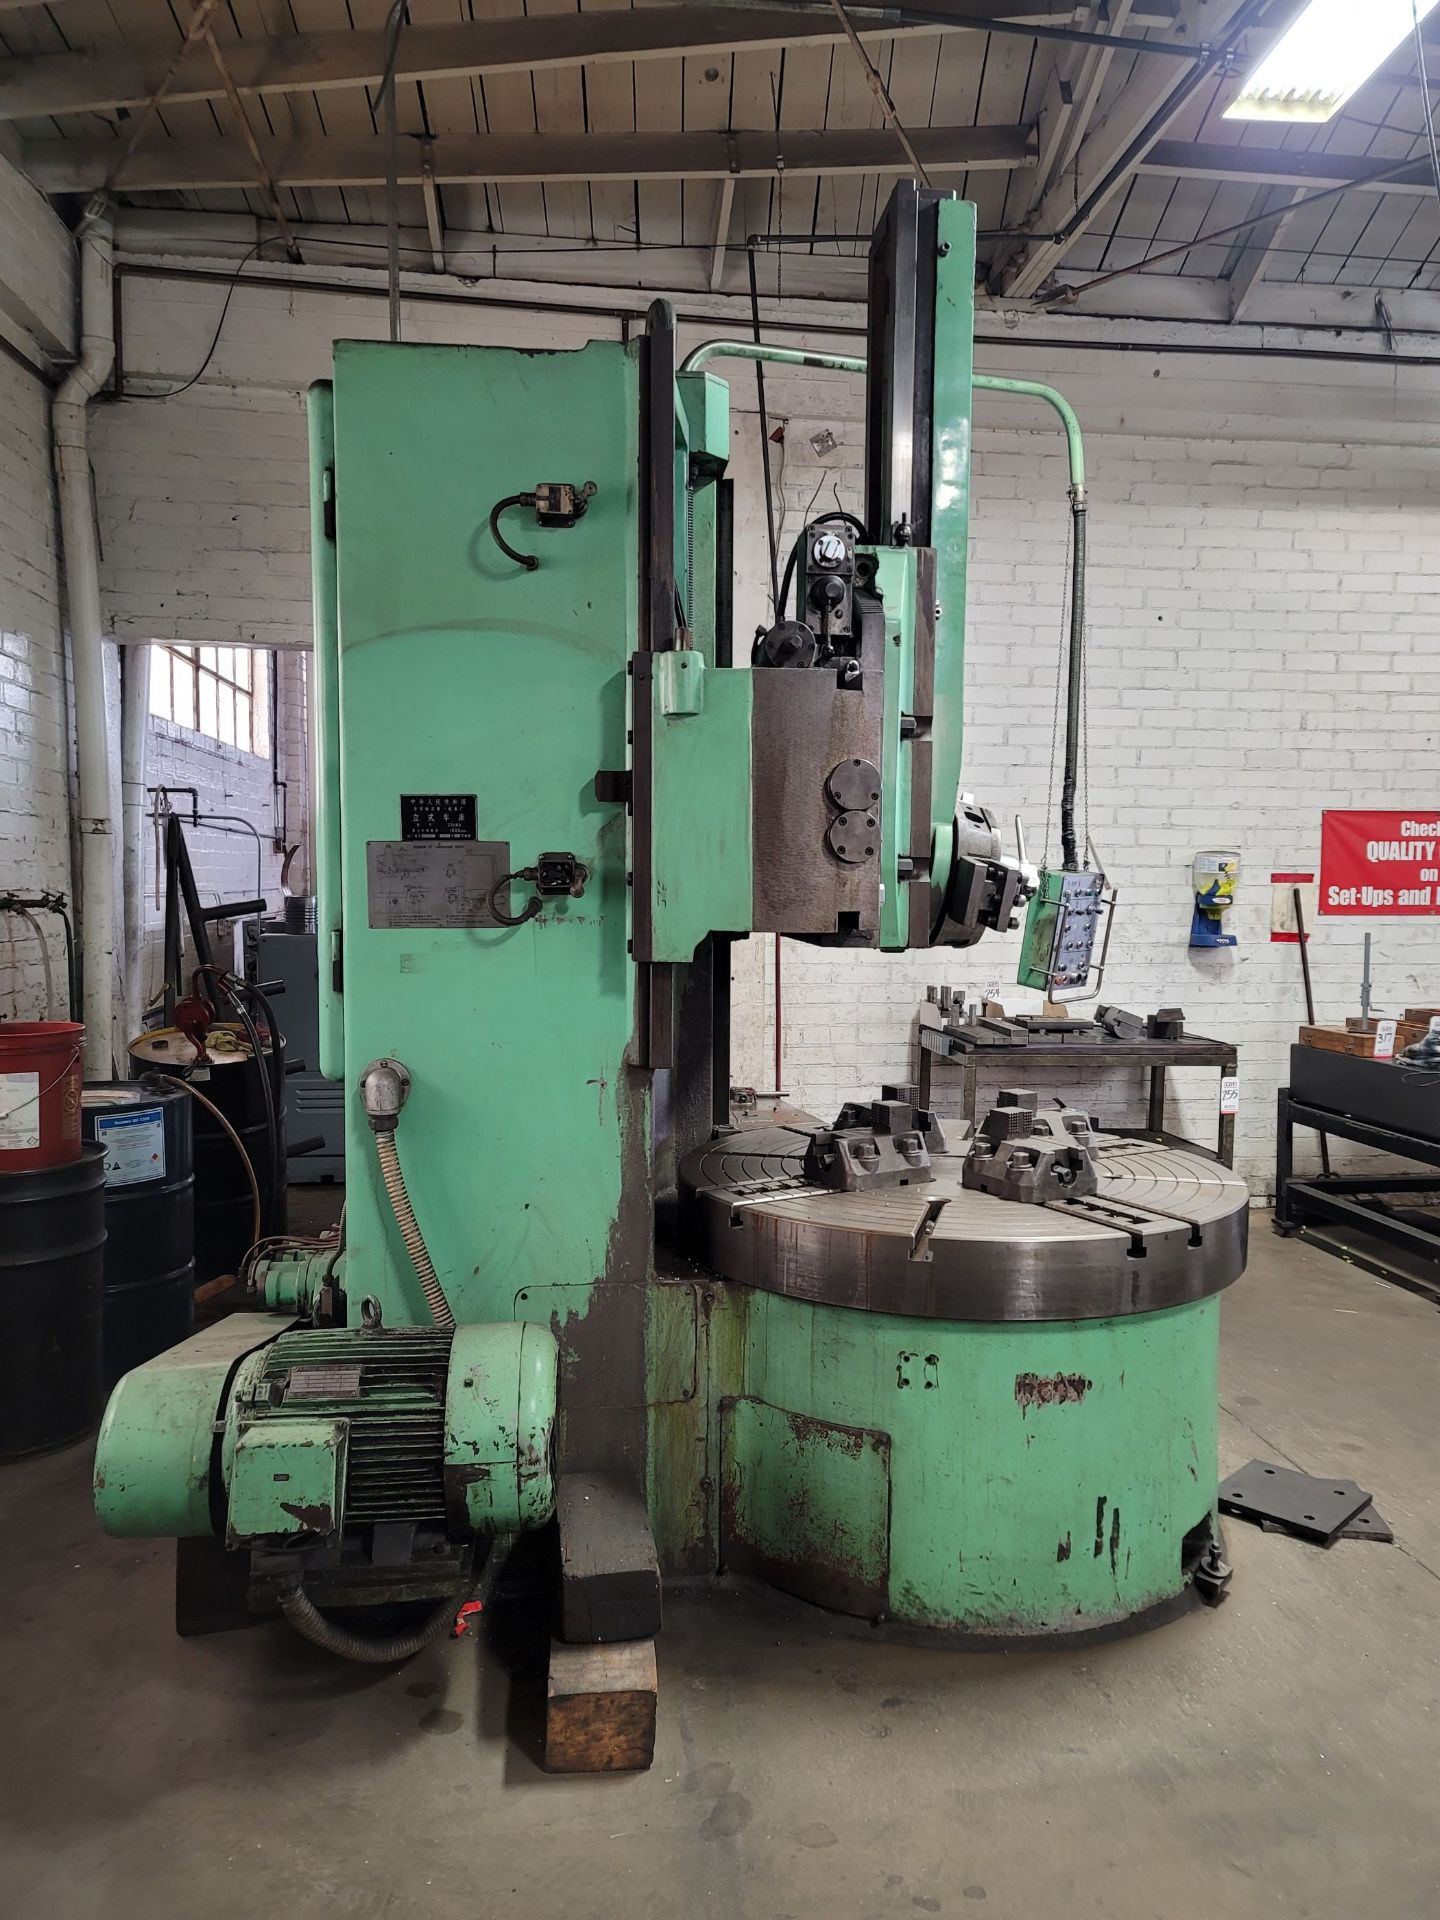 CHINESE 55" VERTICAL TURRET LATHE, 38” SWING, PENDANT CONTROL, 220V, S/N 92-36 - Image 3 of 4